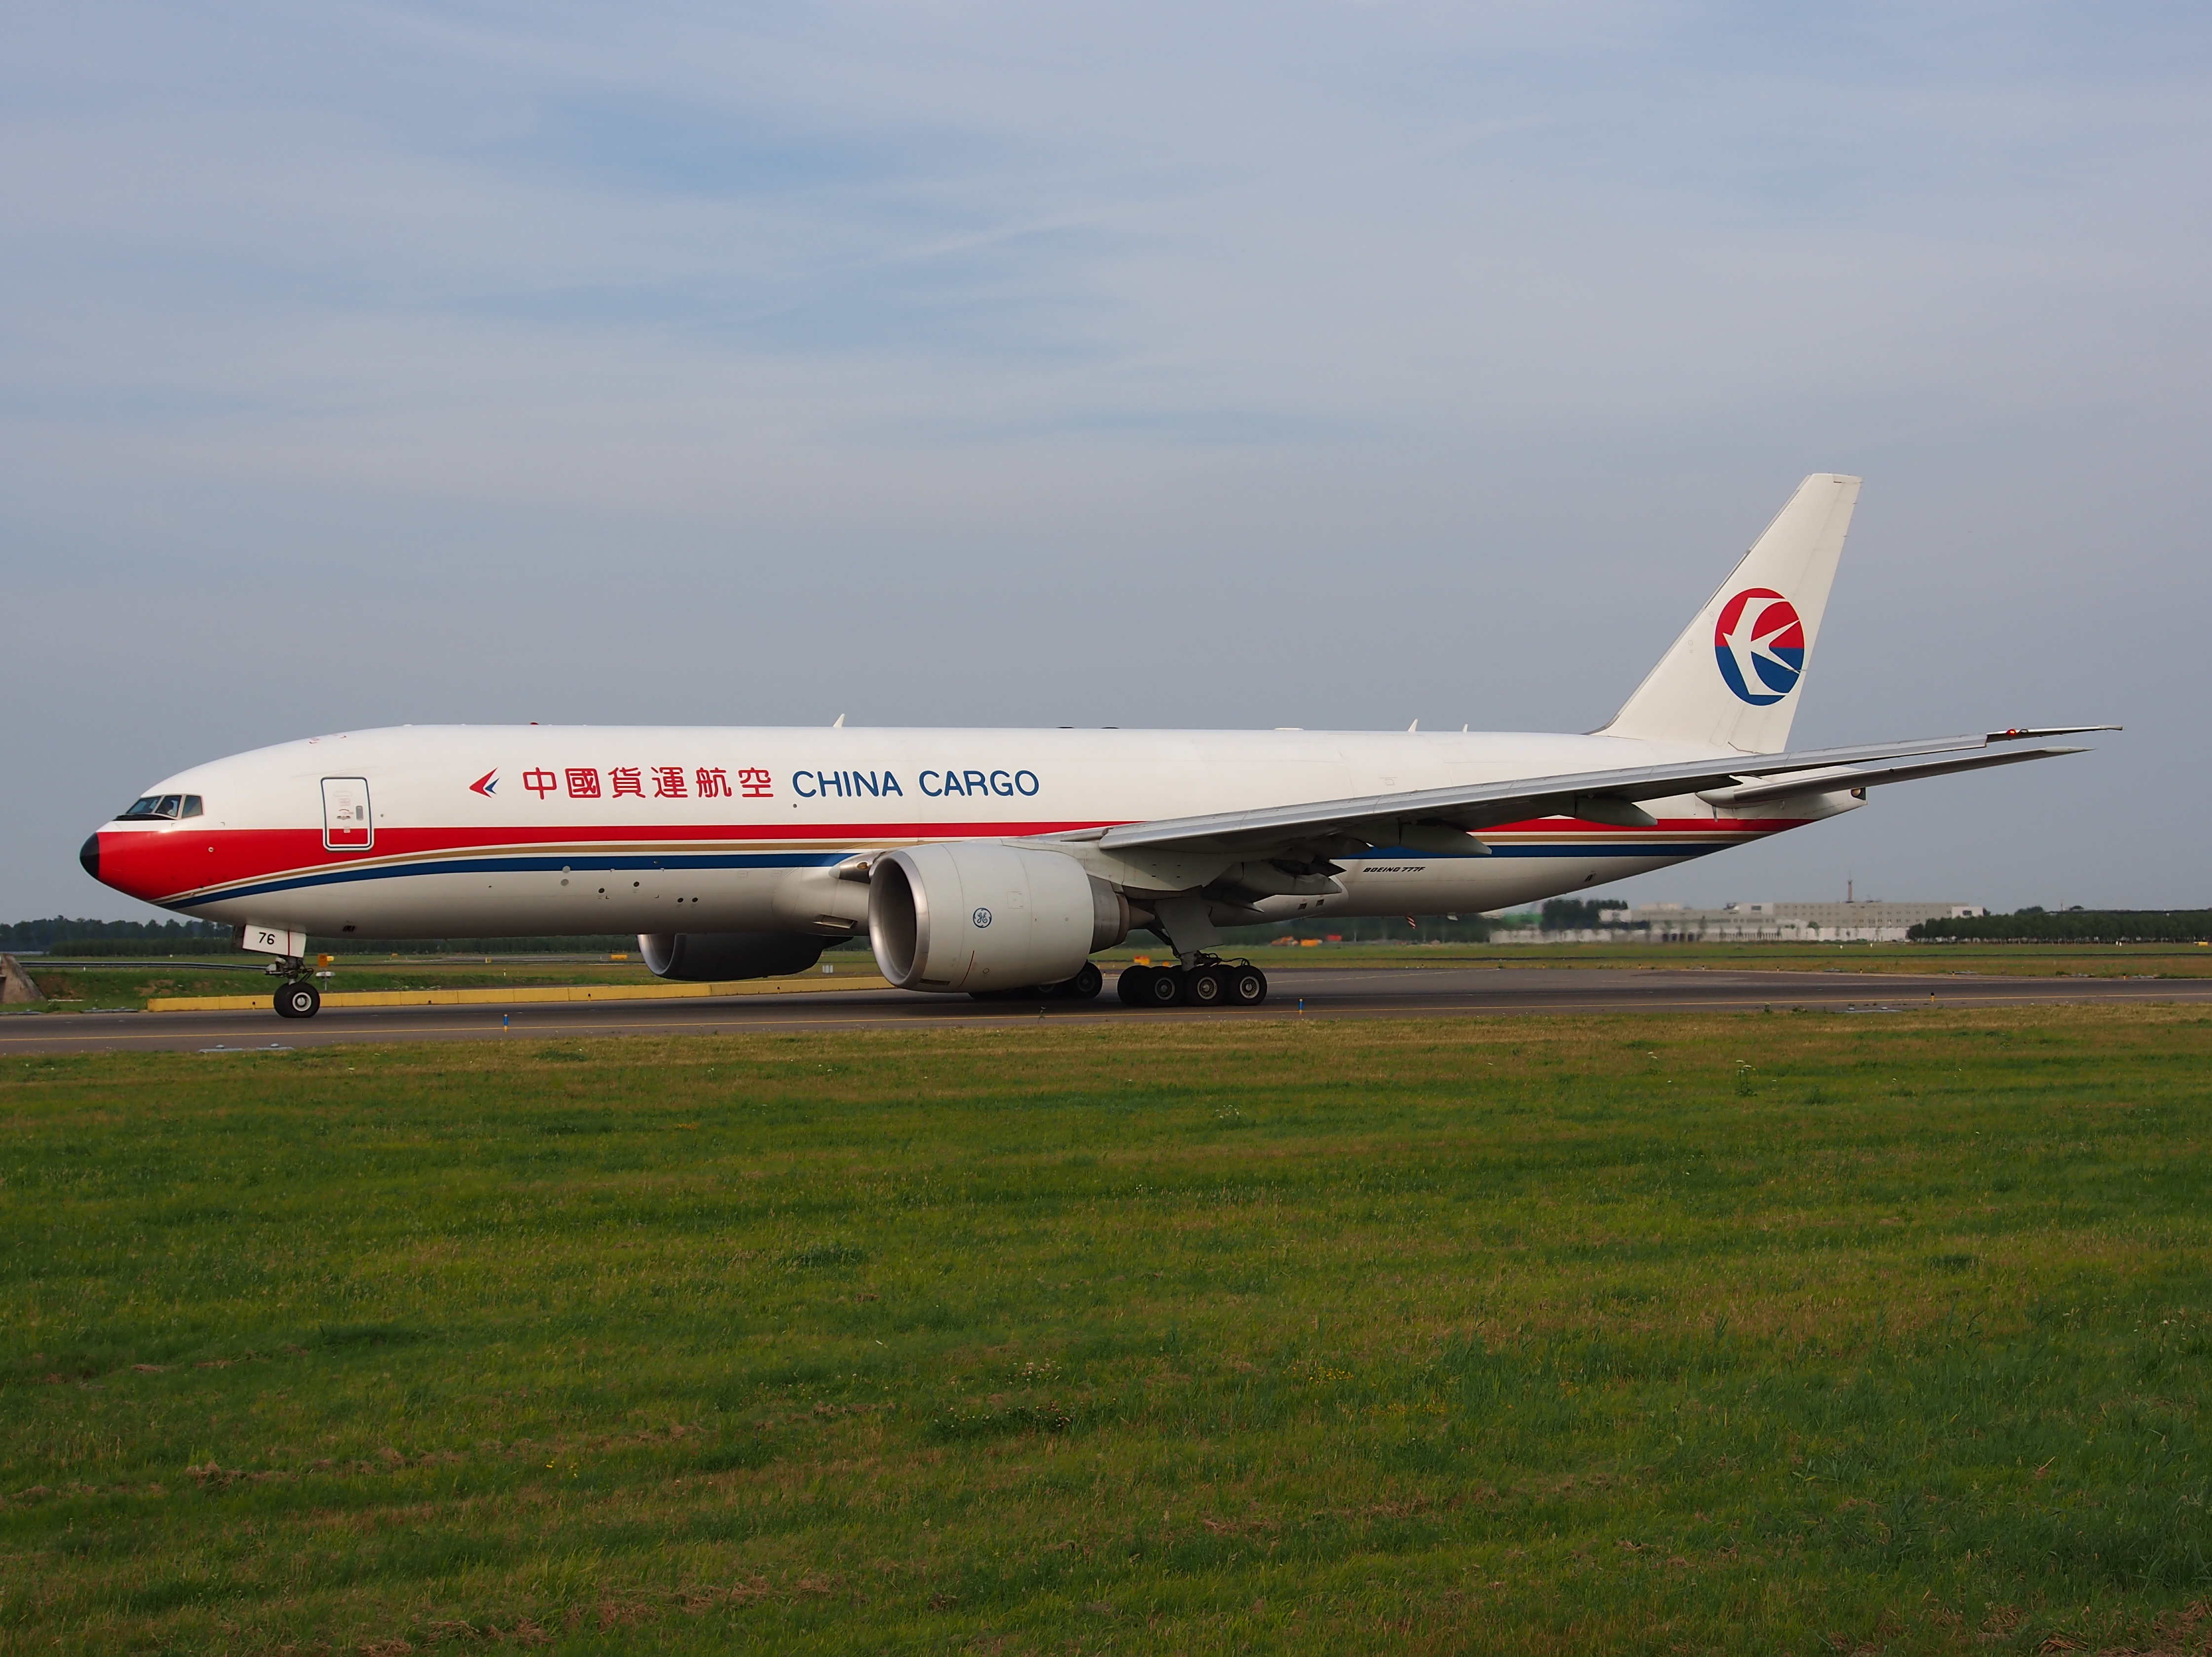 B-2076 China Cargo Airlines Boeing 777-F6N - cn 37711, taxiing 22july2013 pic-007